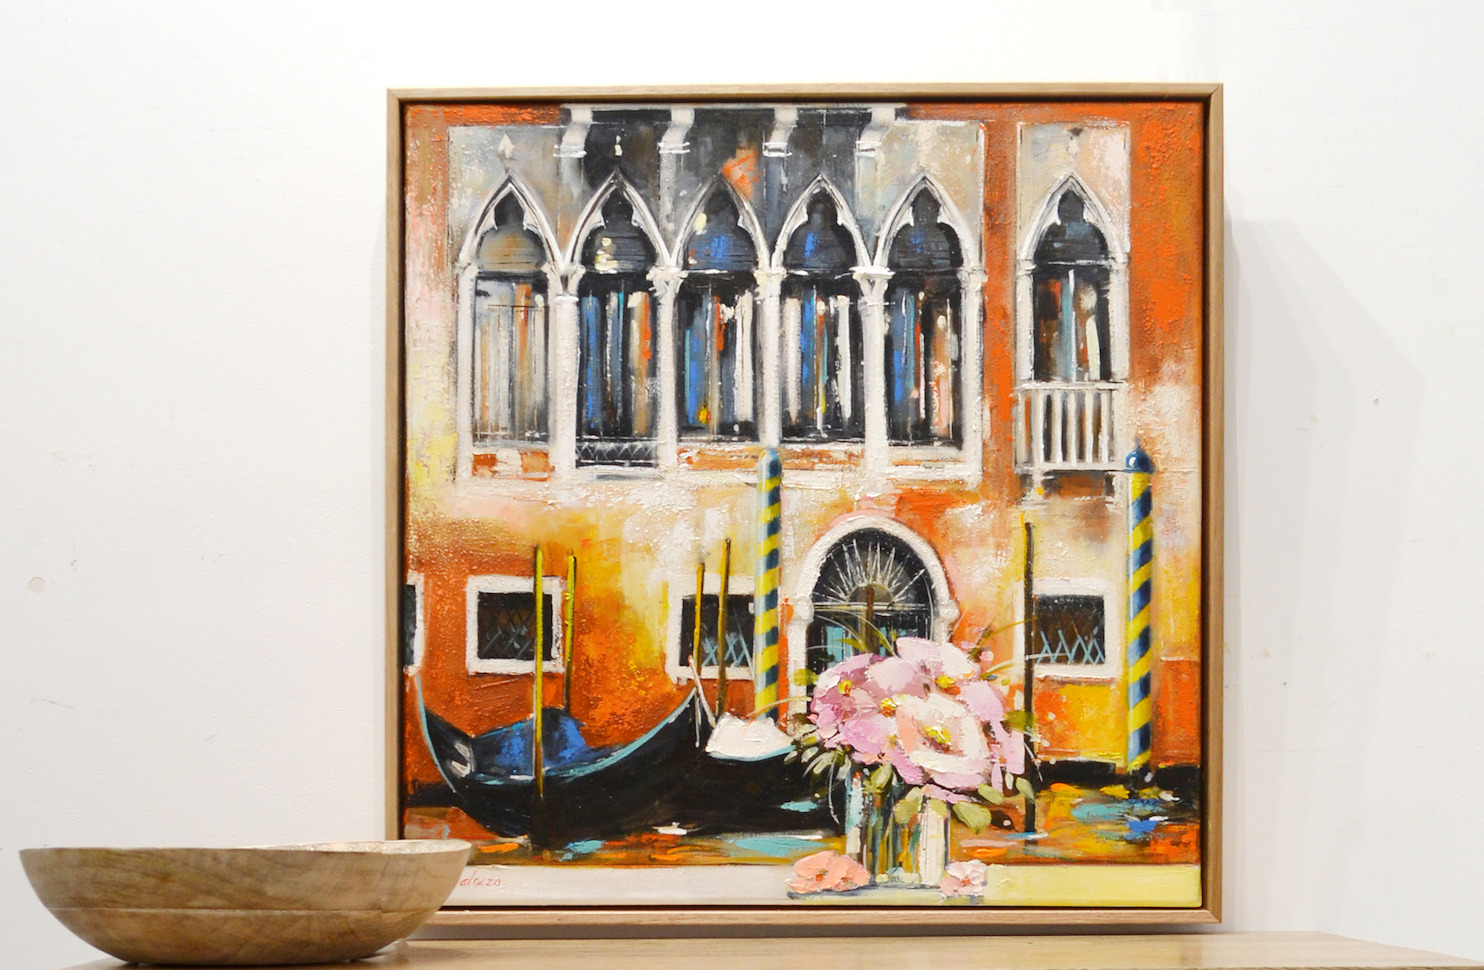 Framed Front View Of Cityscape Painting "Still Life Gondola" By Judith Dalozzo